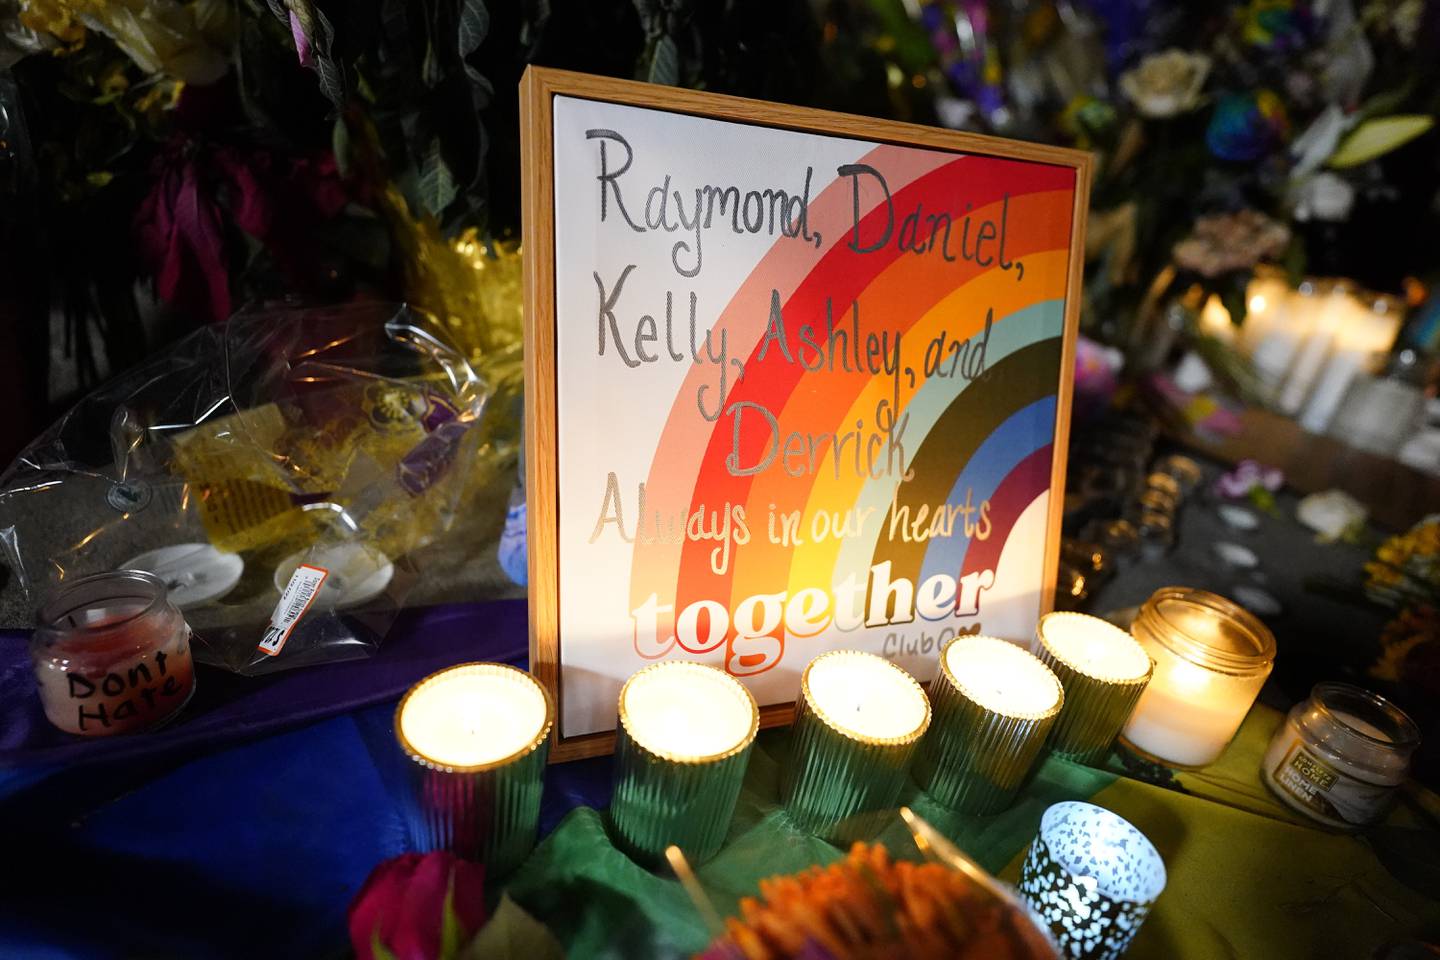 Names of the victims are shown on a rainbow during a candlelight vigil on a corner near the site of a weekend mass shooting at a gay bar, late Monday, Nov. 21, 2022, in Colorado Springs, Colo. (AP Photo/Jack Dempsey)